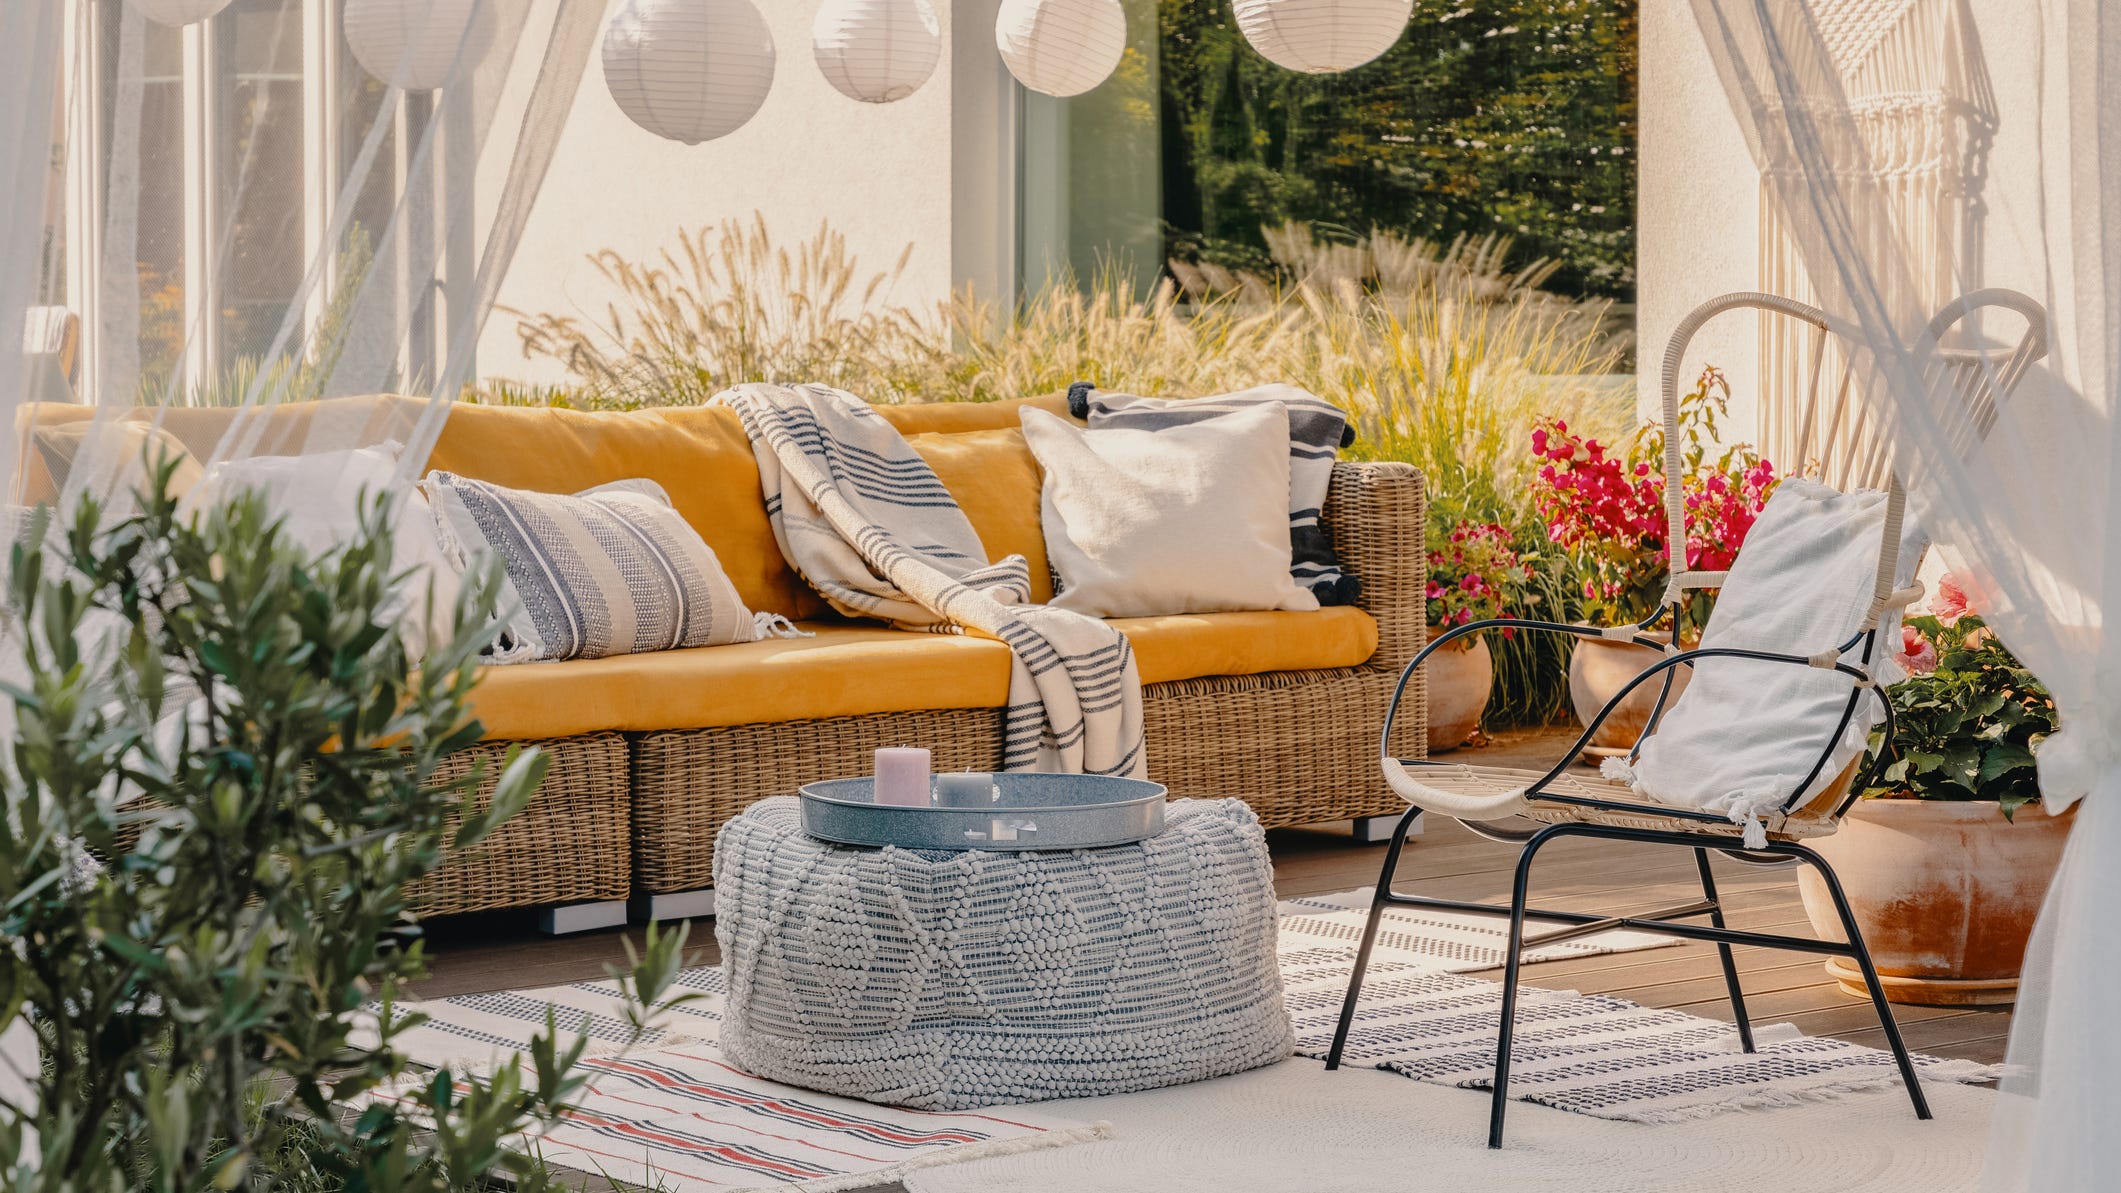 Best Places To Patio Furniture, Crate And Barrel Outdoor Bar Stools